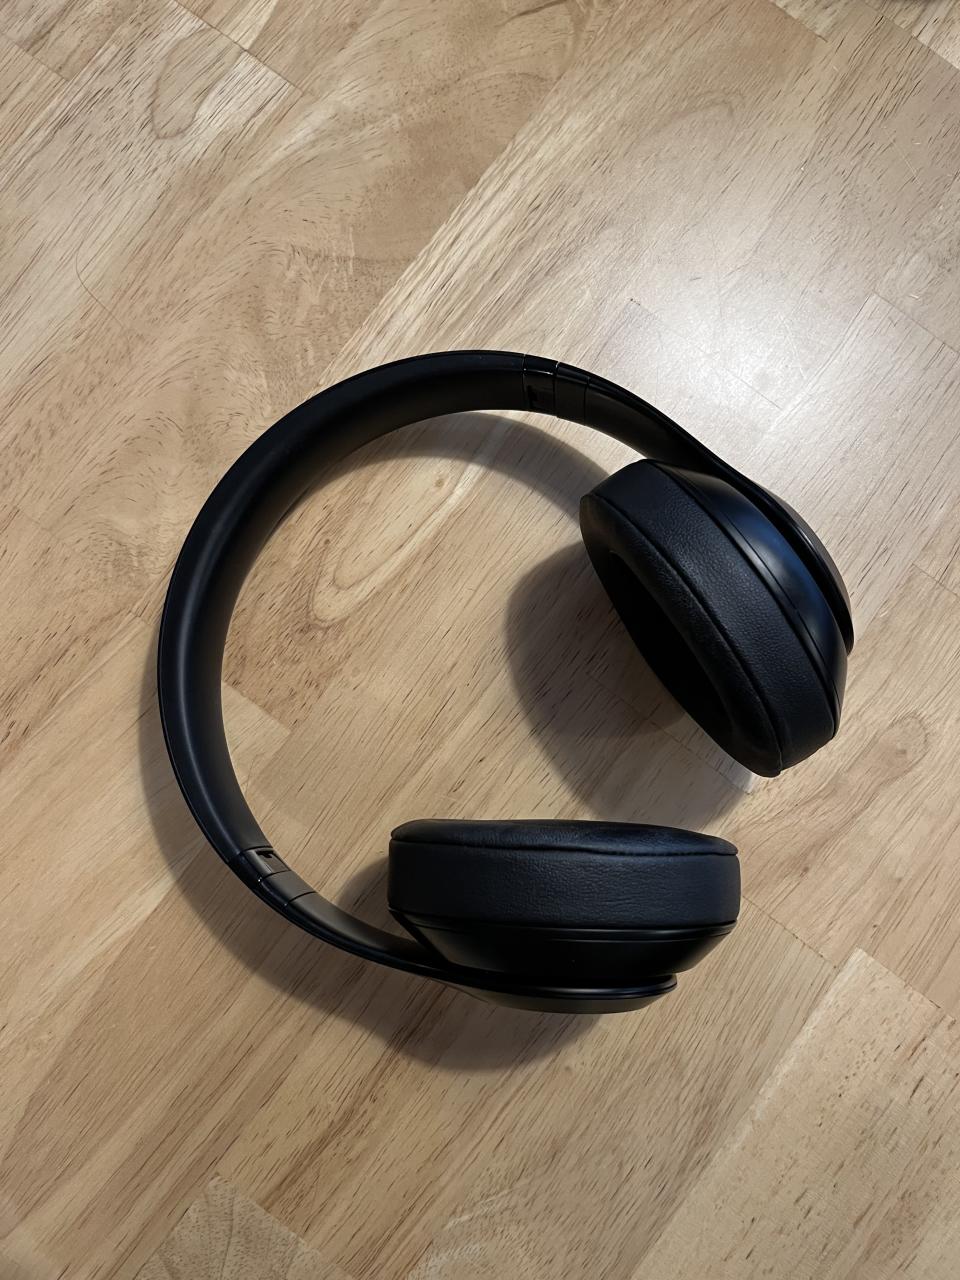 Beats Studio3 Wireless Over-Ear Headphones review, These noise-canceling headphones are great for the office, but I have a few suggestions (photo via author).